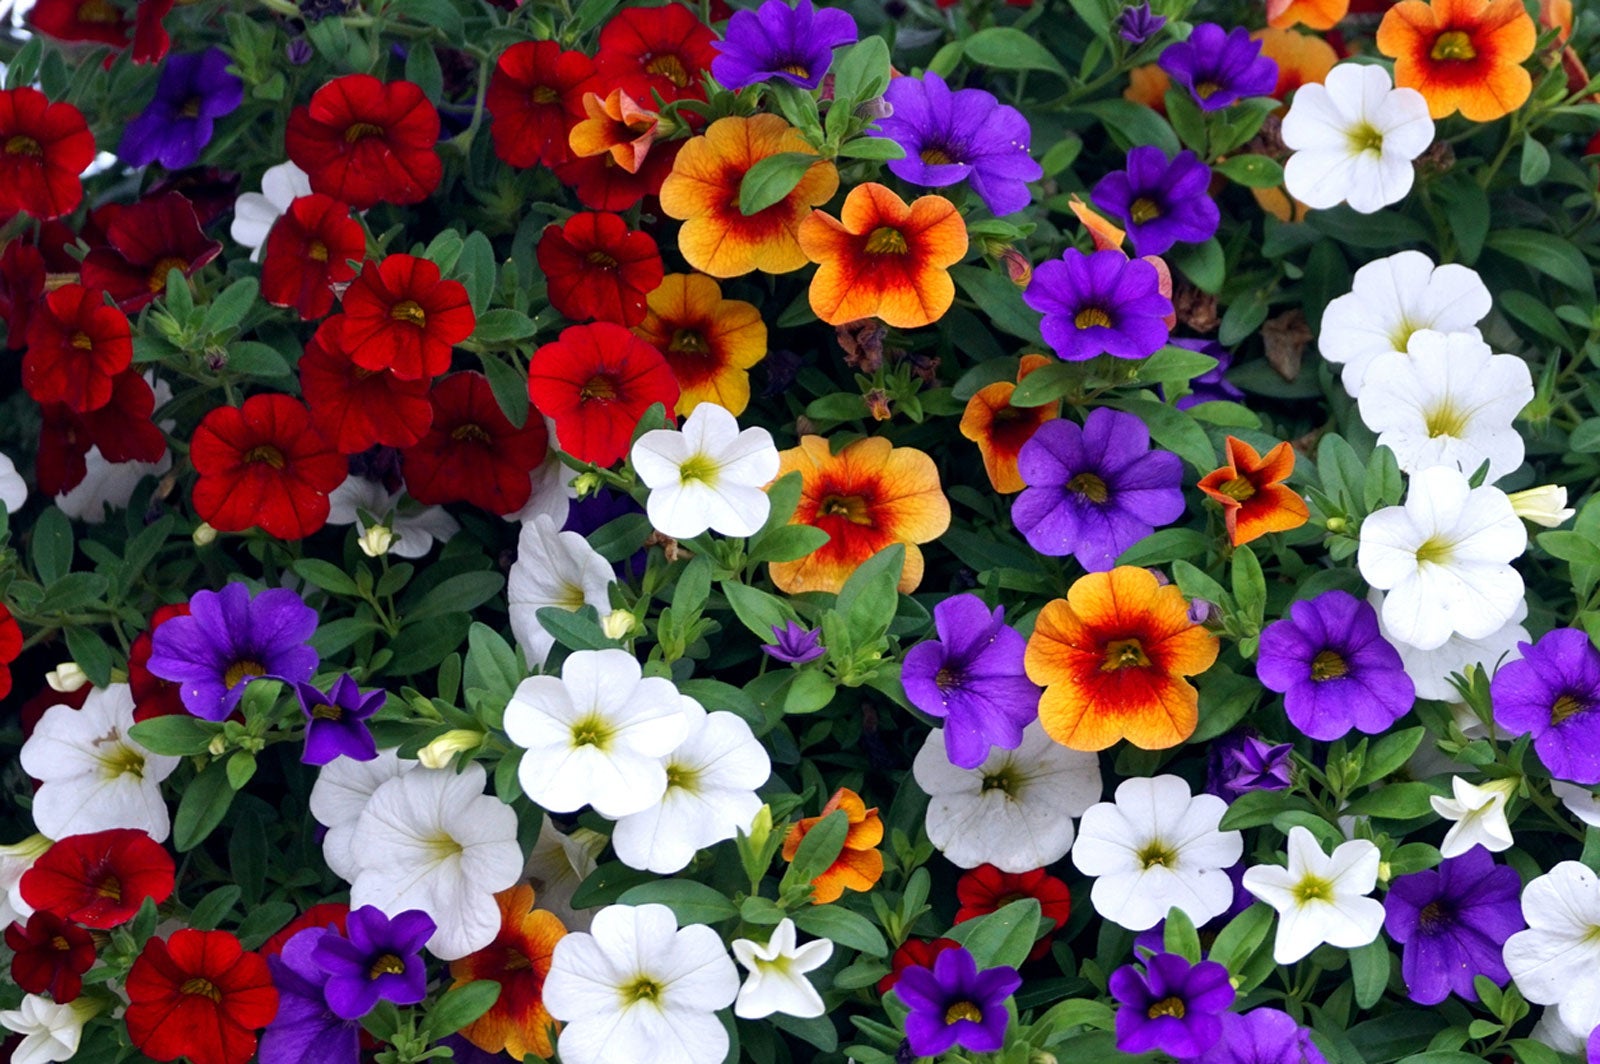 Calibrachoa Care - How To Grow And Care For Million Bells Flower